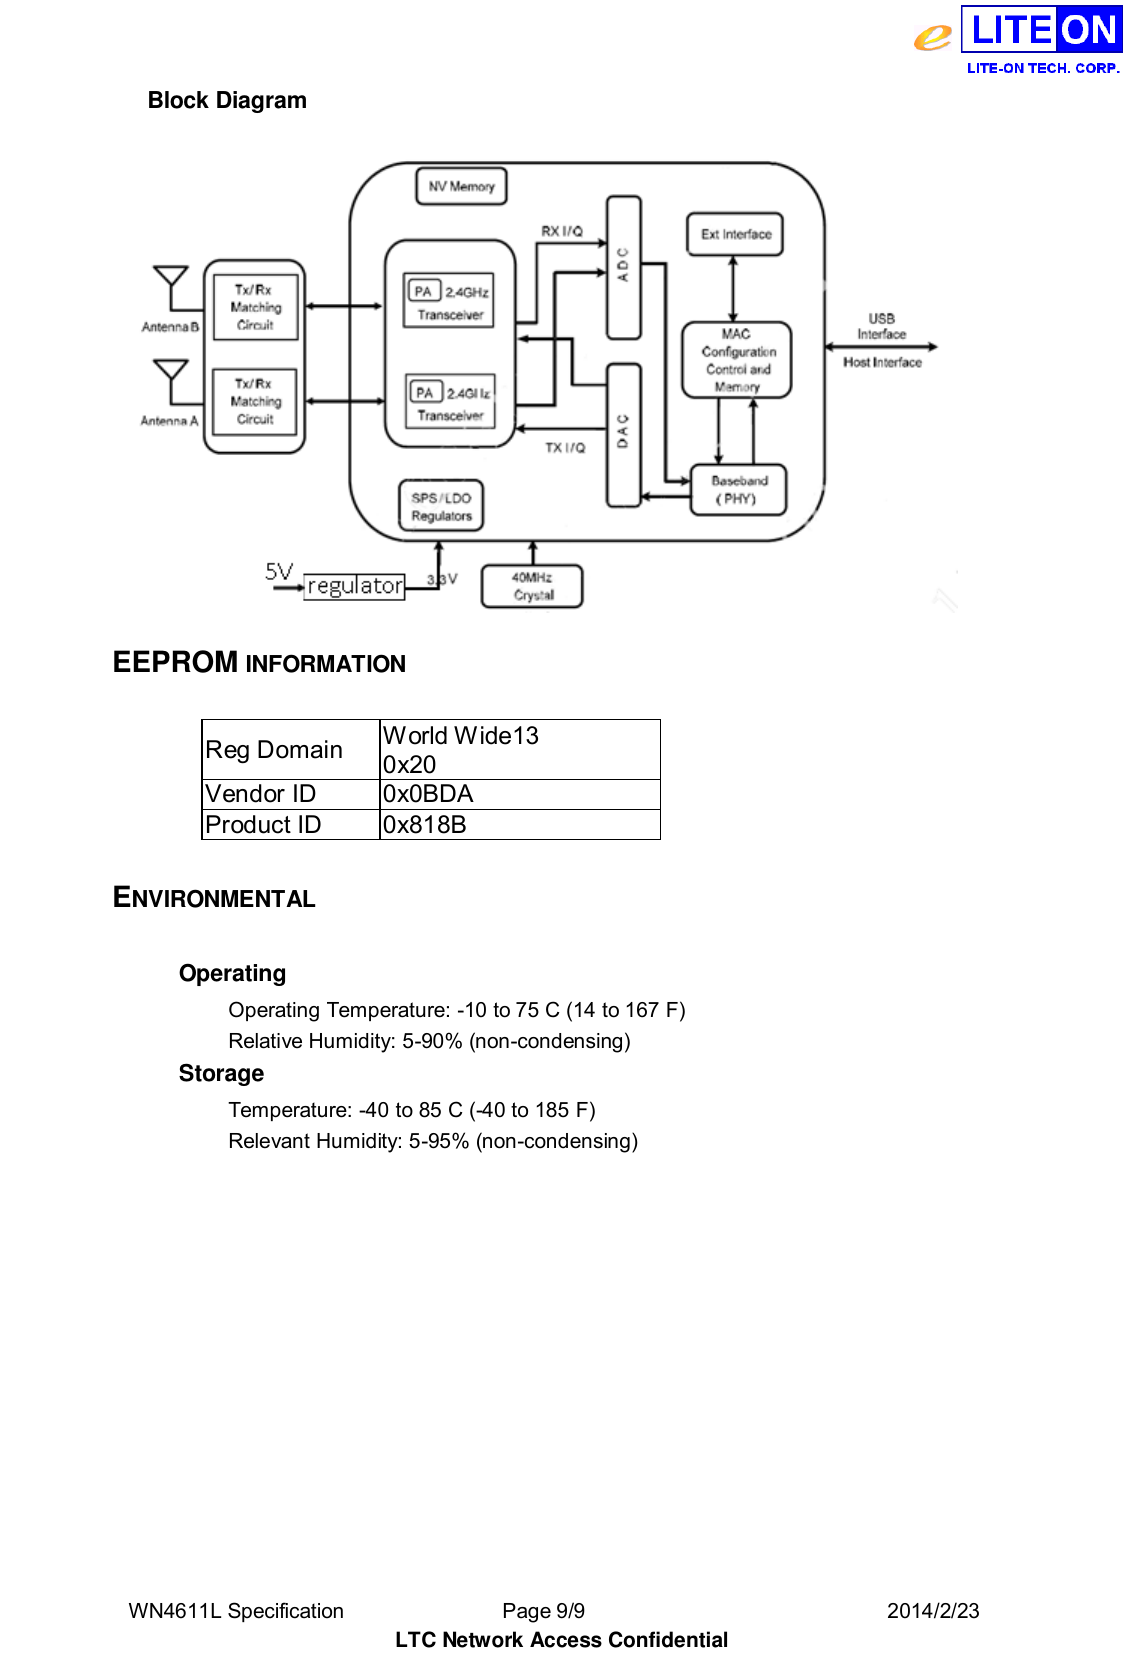  WN4611L Specification               Page 9/9                              2014/2/23 LTC Network Access Confidential Block Diagram    EEPROM INFORMATION  Reg Domain World Wide13 0x20 Vendor ID 0x0BDA Product ID 0x818B  ENVIRONMENTAL  Operating   Operating Temperature: -10 to 75 C (14 to 167 F)   Relative Humidity: 5-90% (non-condensing)   Storage   Temperature: -40 to 85 C (-40 to 185 F)   Relevant Humidity: 5-95% (non-condensing) 